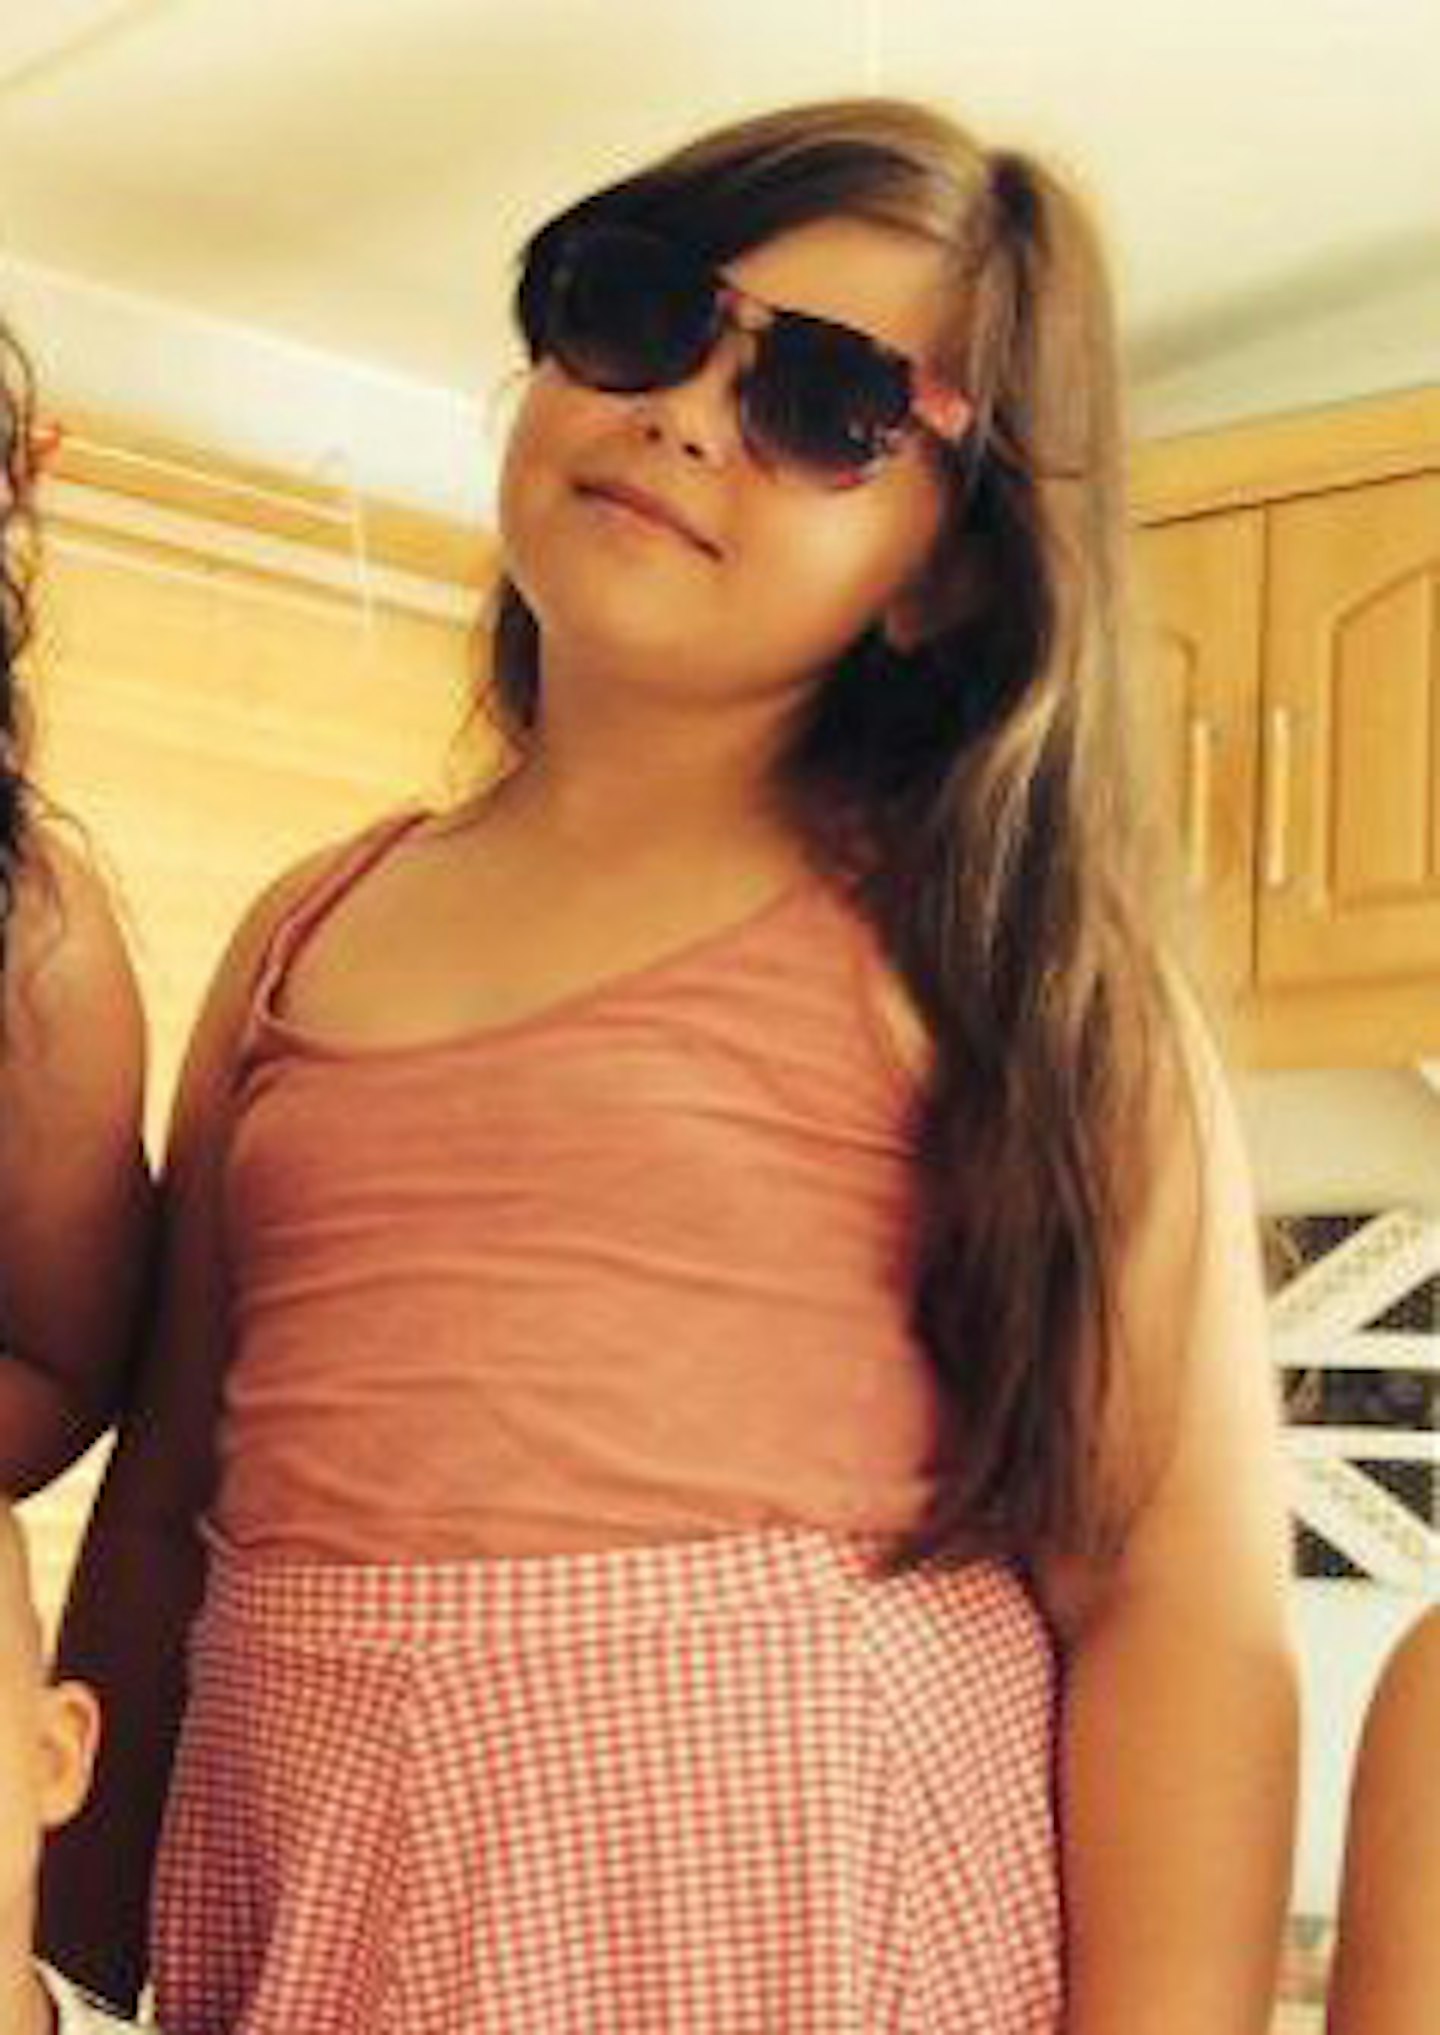 danielle-obese-child-overweight